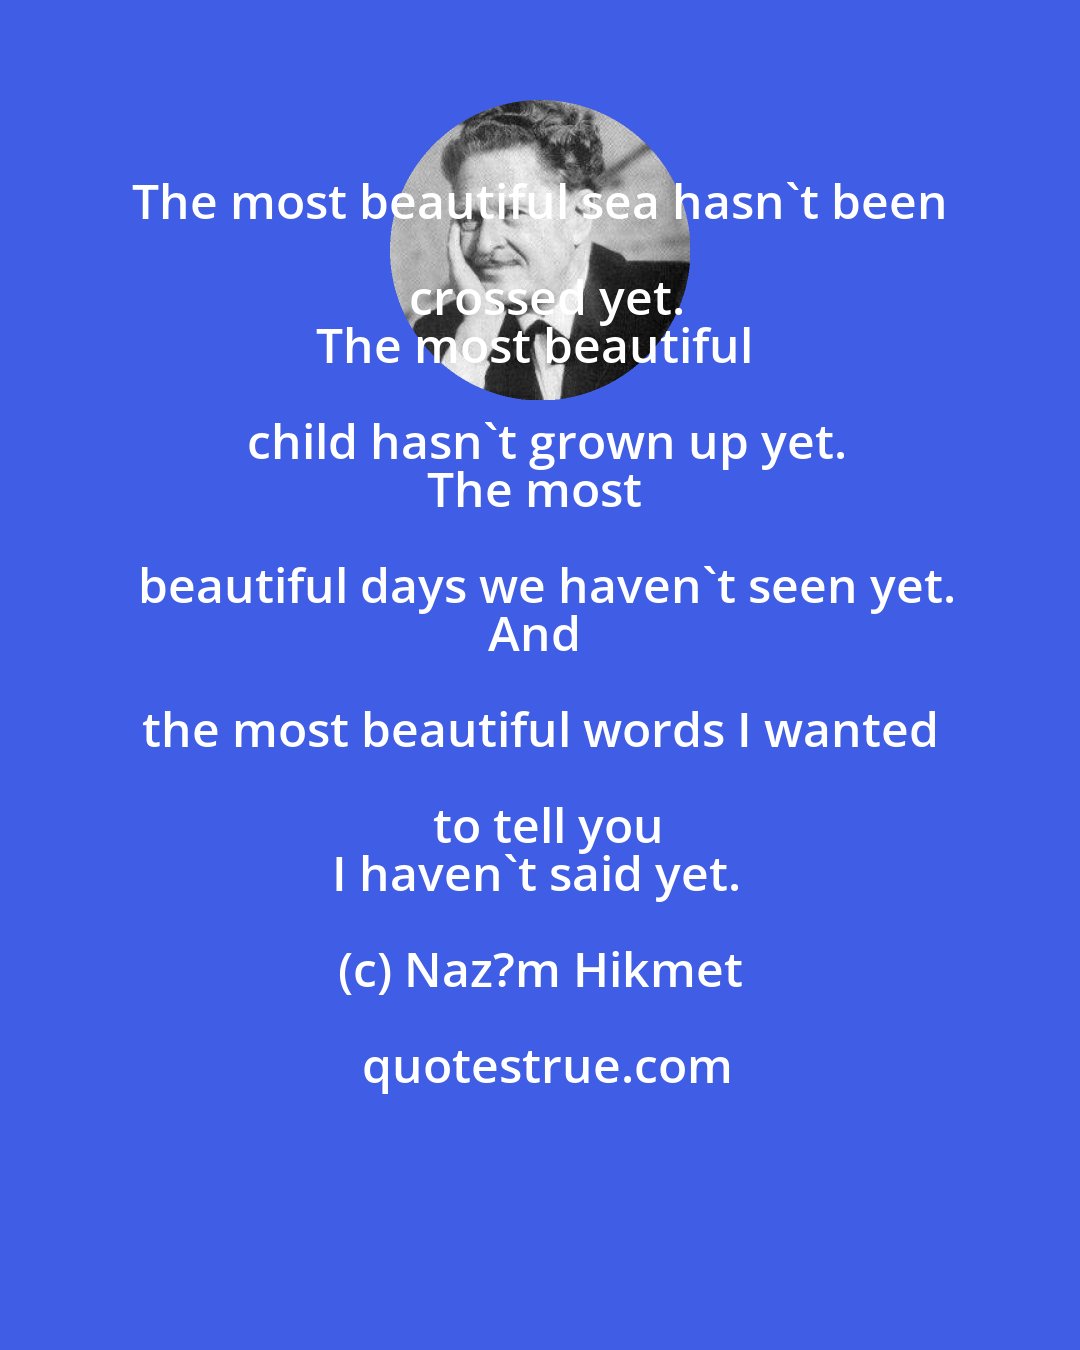 Naz?m Hikmet: The most beautiful sea hasn't been crossed yet.
The most beautiful child hasn't grown up yet.
The most beautiful days we haven't seen yet.
And the most beautiful words I wanted to tell you
I haven't said yet.